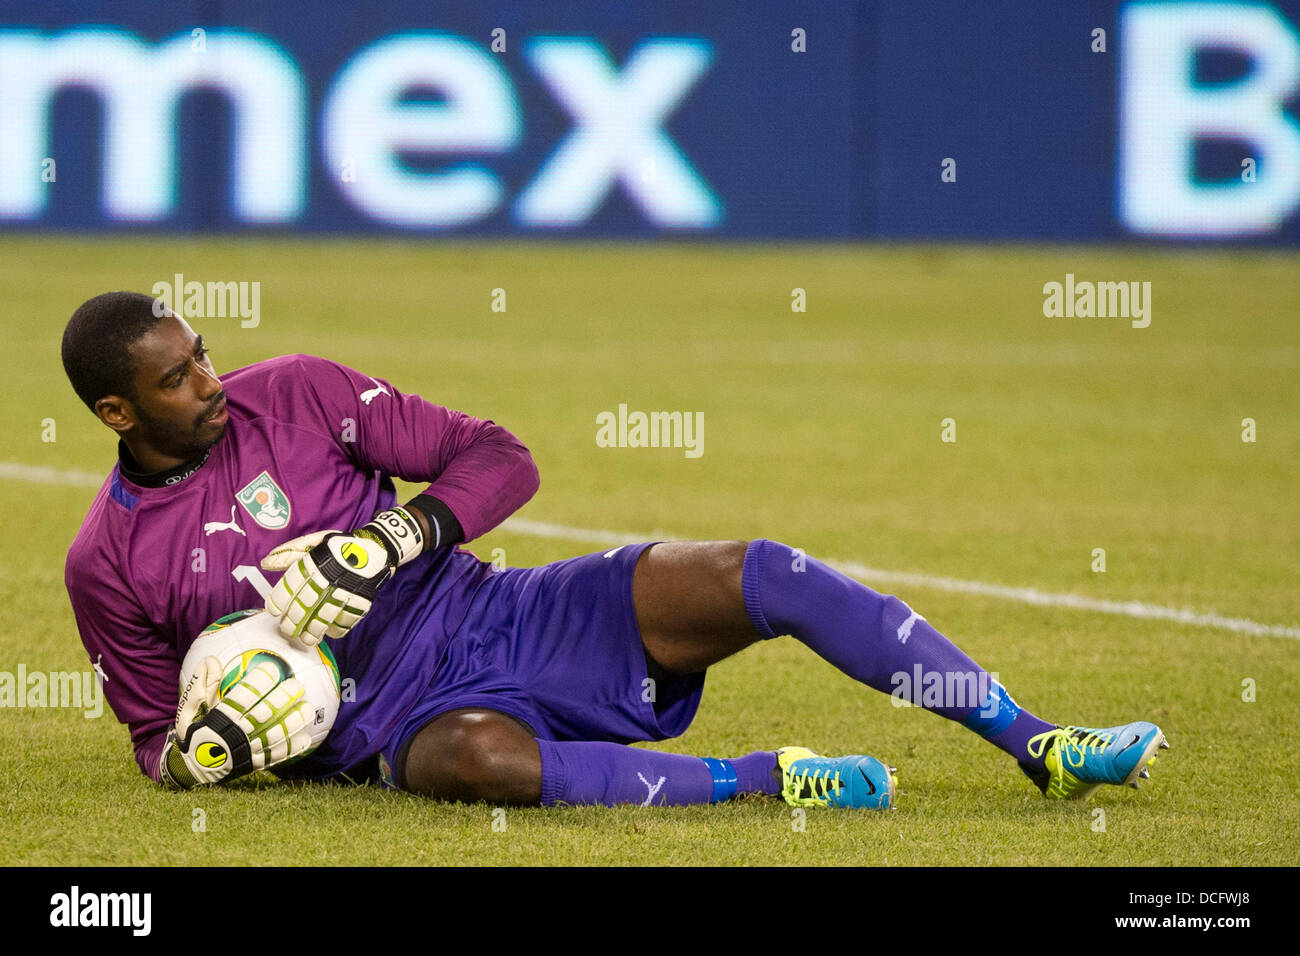 Aug. 14, 2013 - East Rutherford, New Jersey, U.S - August 14, 2013: Ivory Coast National Team goalkeeper Boubacar Barry (1) lays on the ground holding the ball after a save during the International friendly match between Mexico and Ivory Coast at Met Life Stadium, East Rutherford, NJ. Mexico defeated Ivory Coast 4-1. Stock Photo